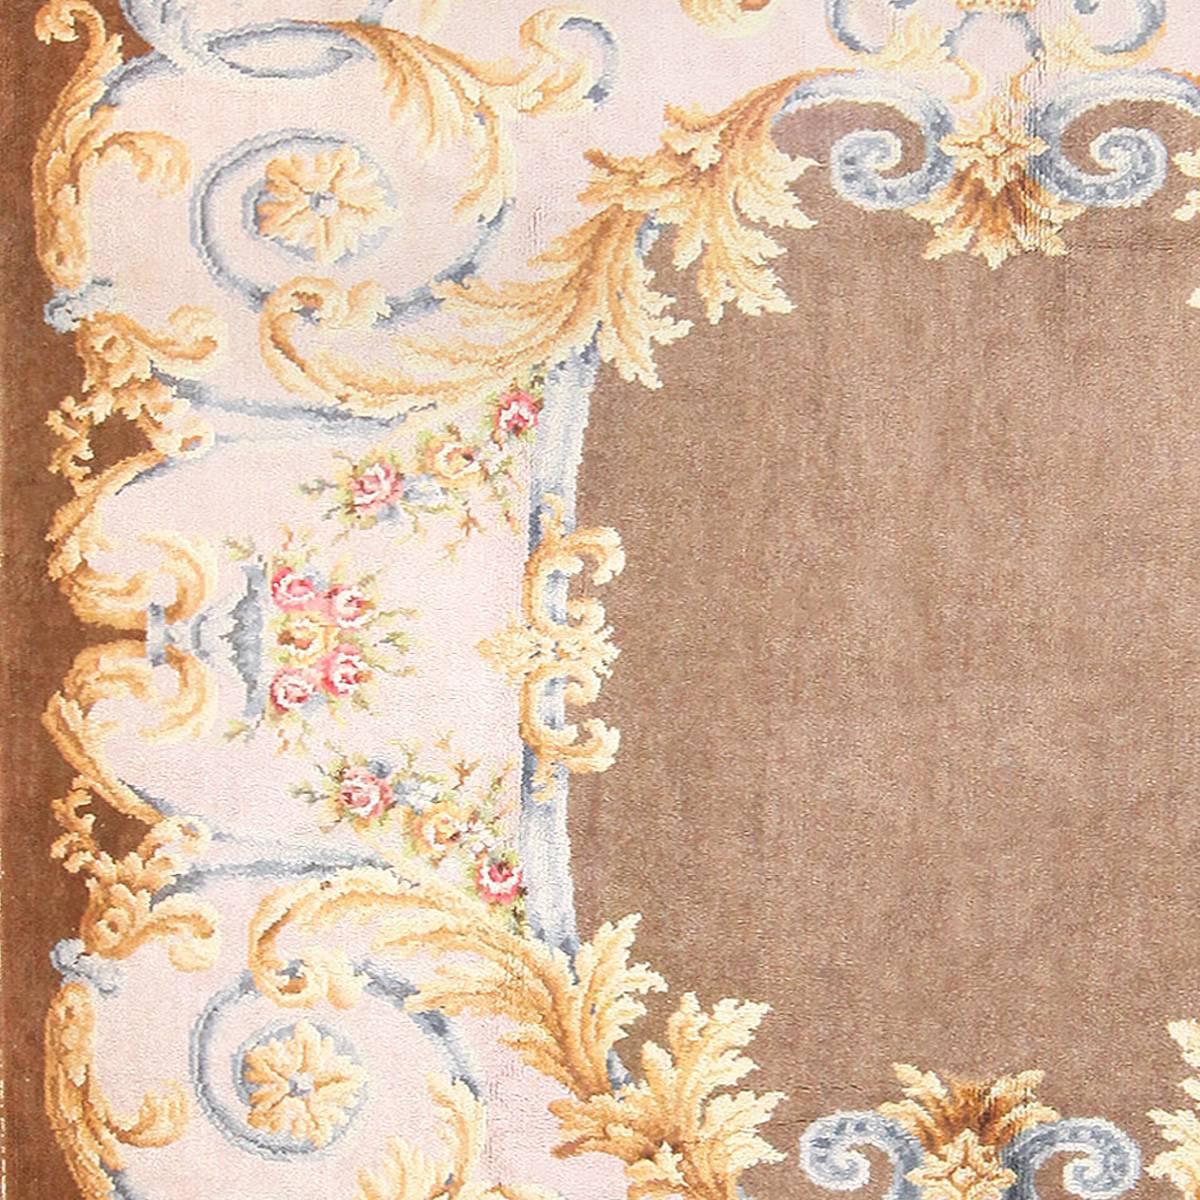 Aubusson Large Antique Savonnerie French Rug. Size: 10 ft 2 in x 17 ft (3.1 m x 5.18 m)